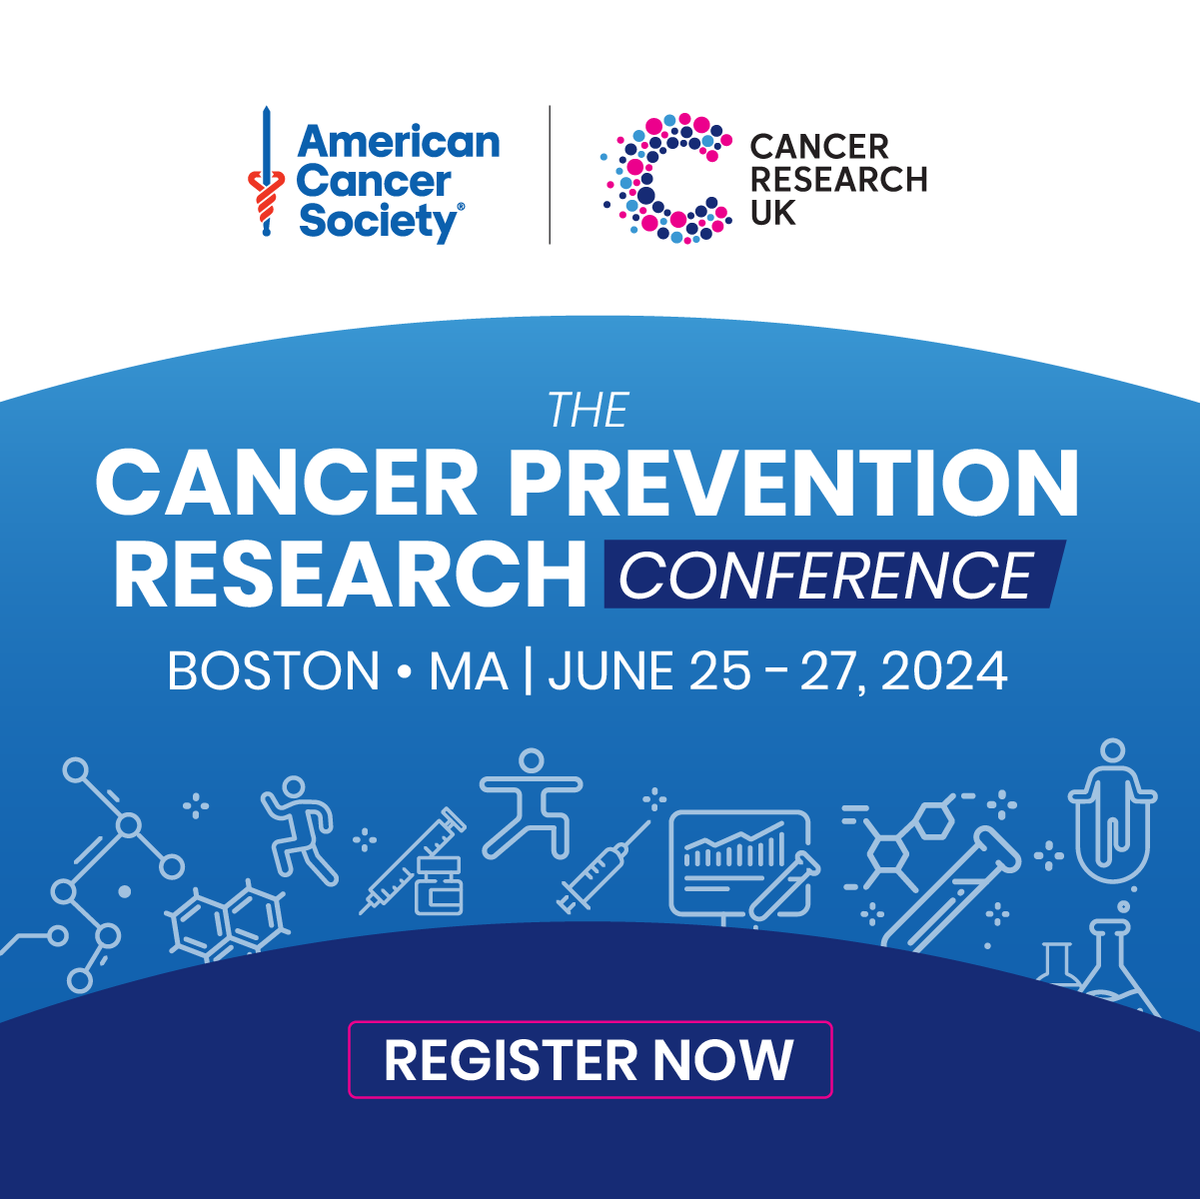 Join @AmericanCancer @CRUKresearch and @theNCI for the first-ever #PrevConf24 to discuss discovery biology, translational & behavioral science, population & implementation research. Learn more and register here: bit.ly/3u7x9BX